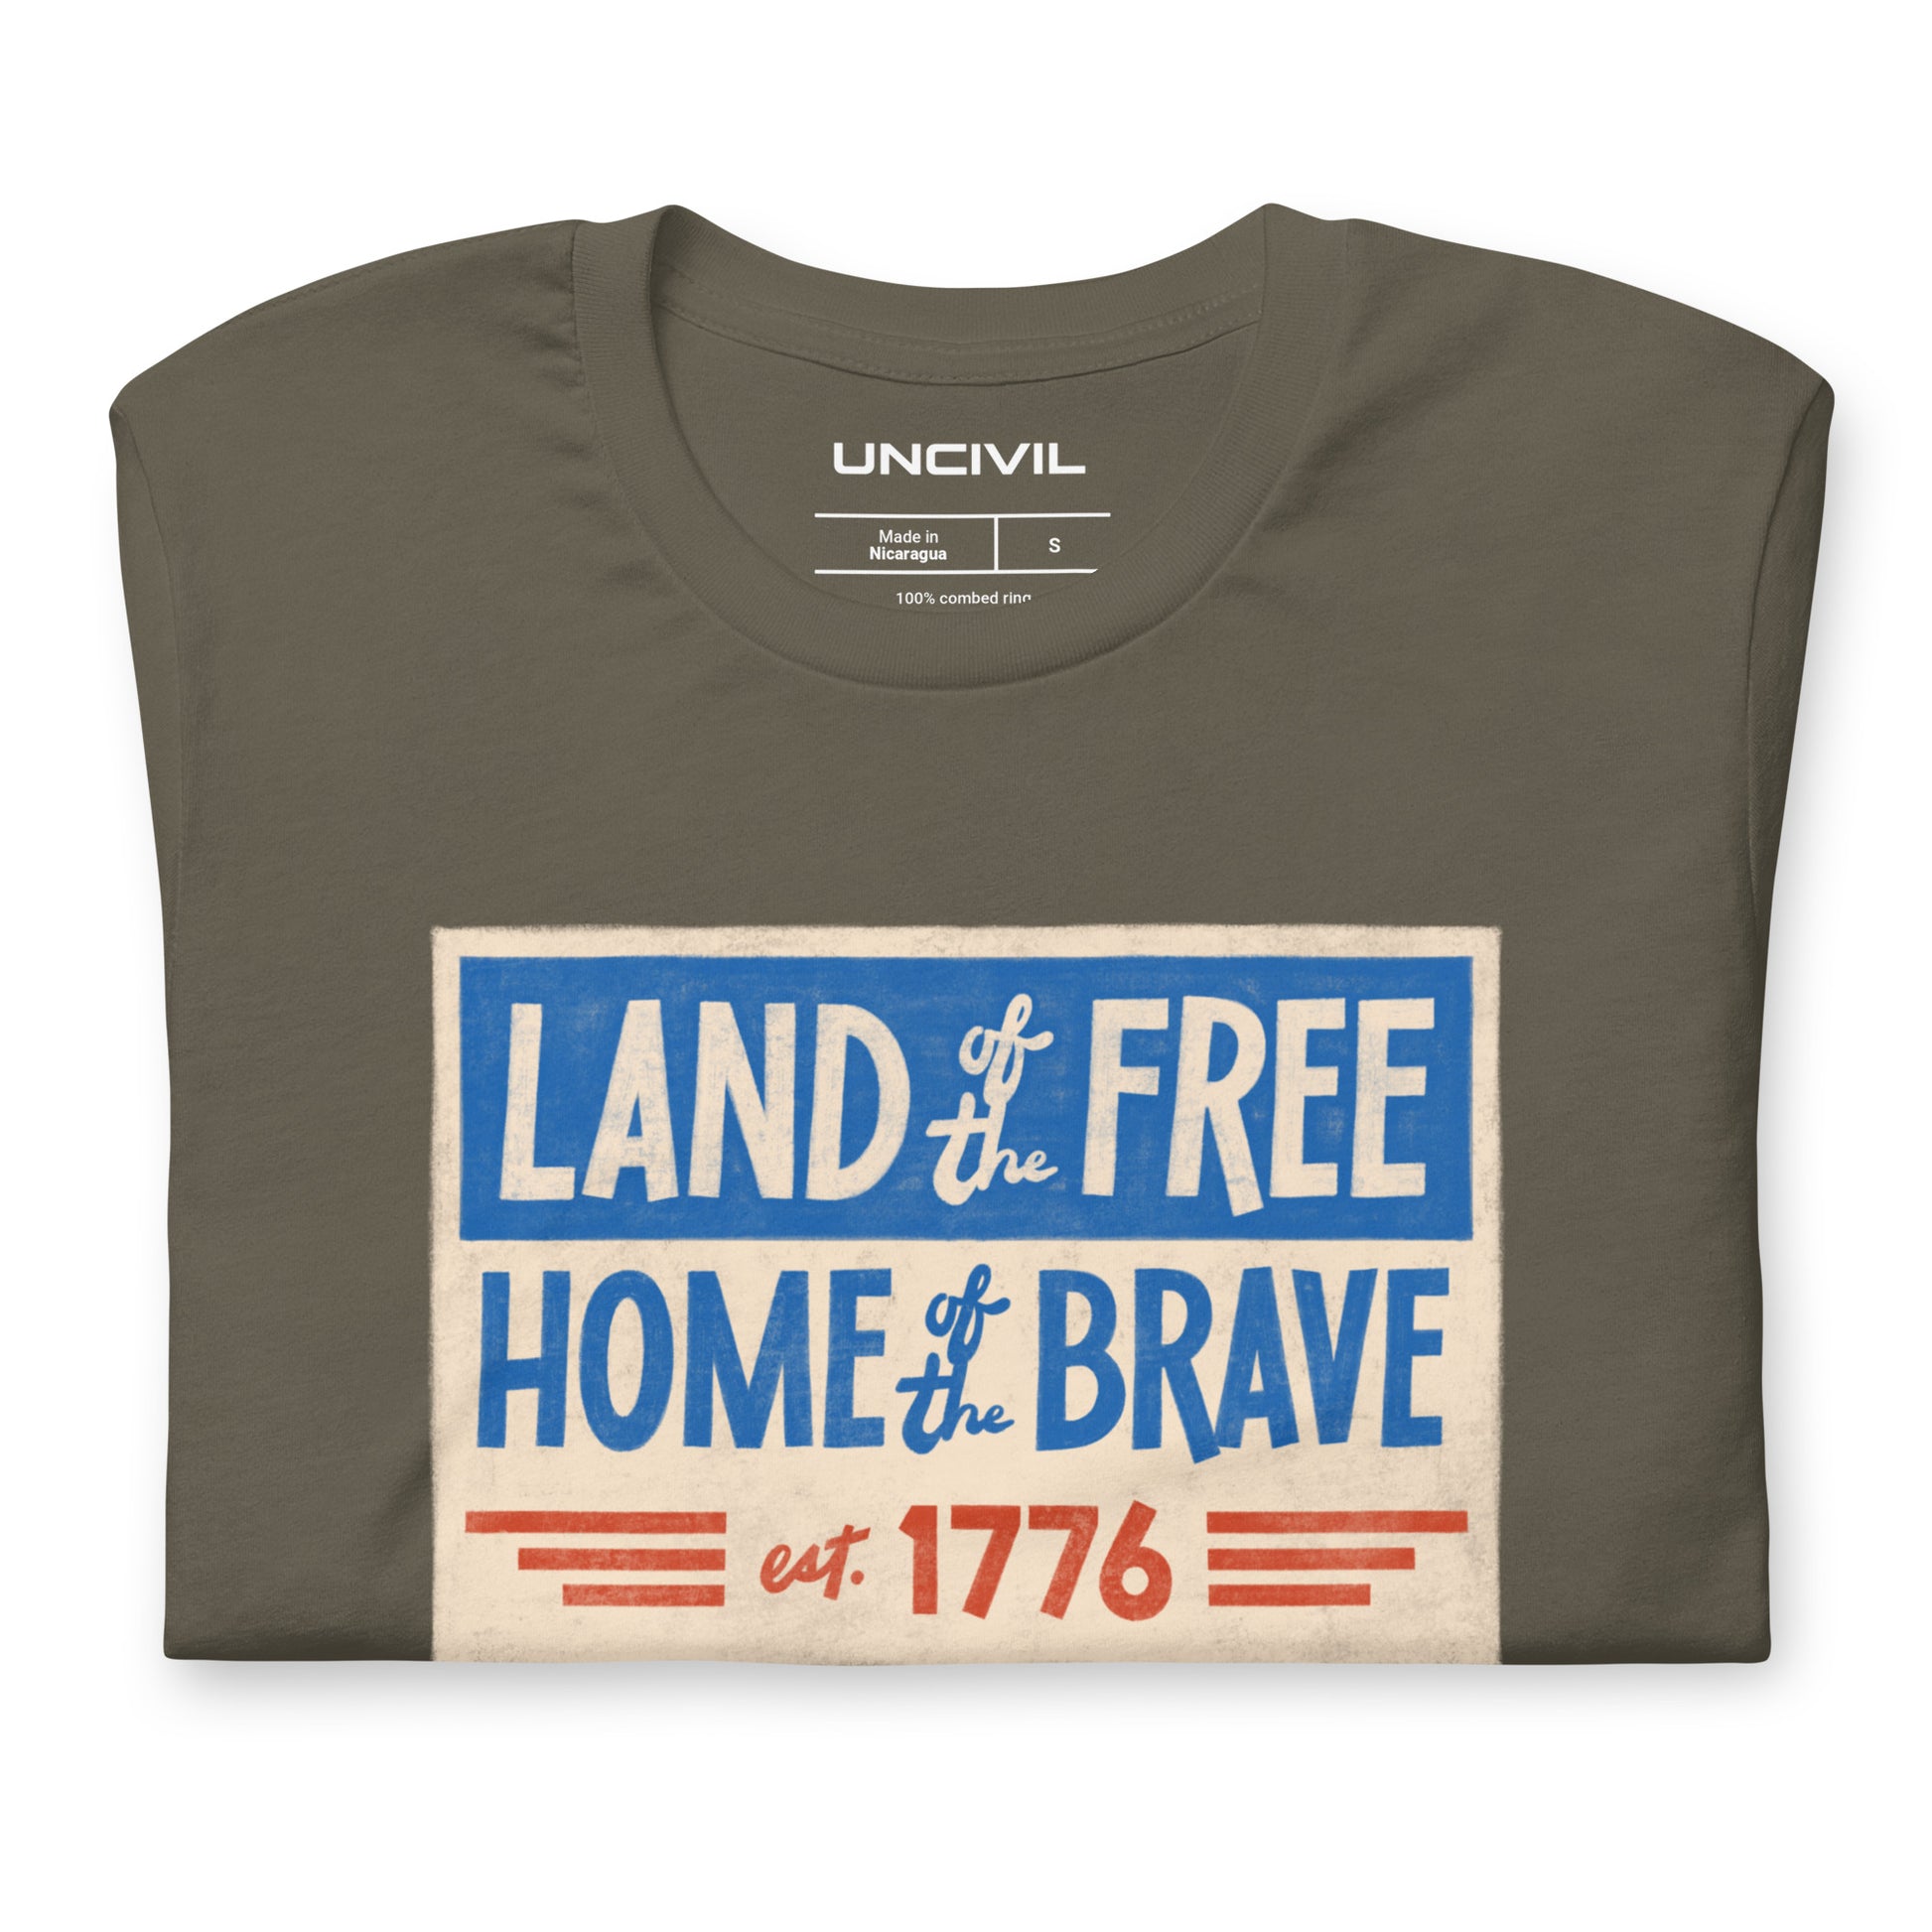 Land of the Free Home of the Brave t-shirt, army green unisex patriotic shirt.